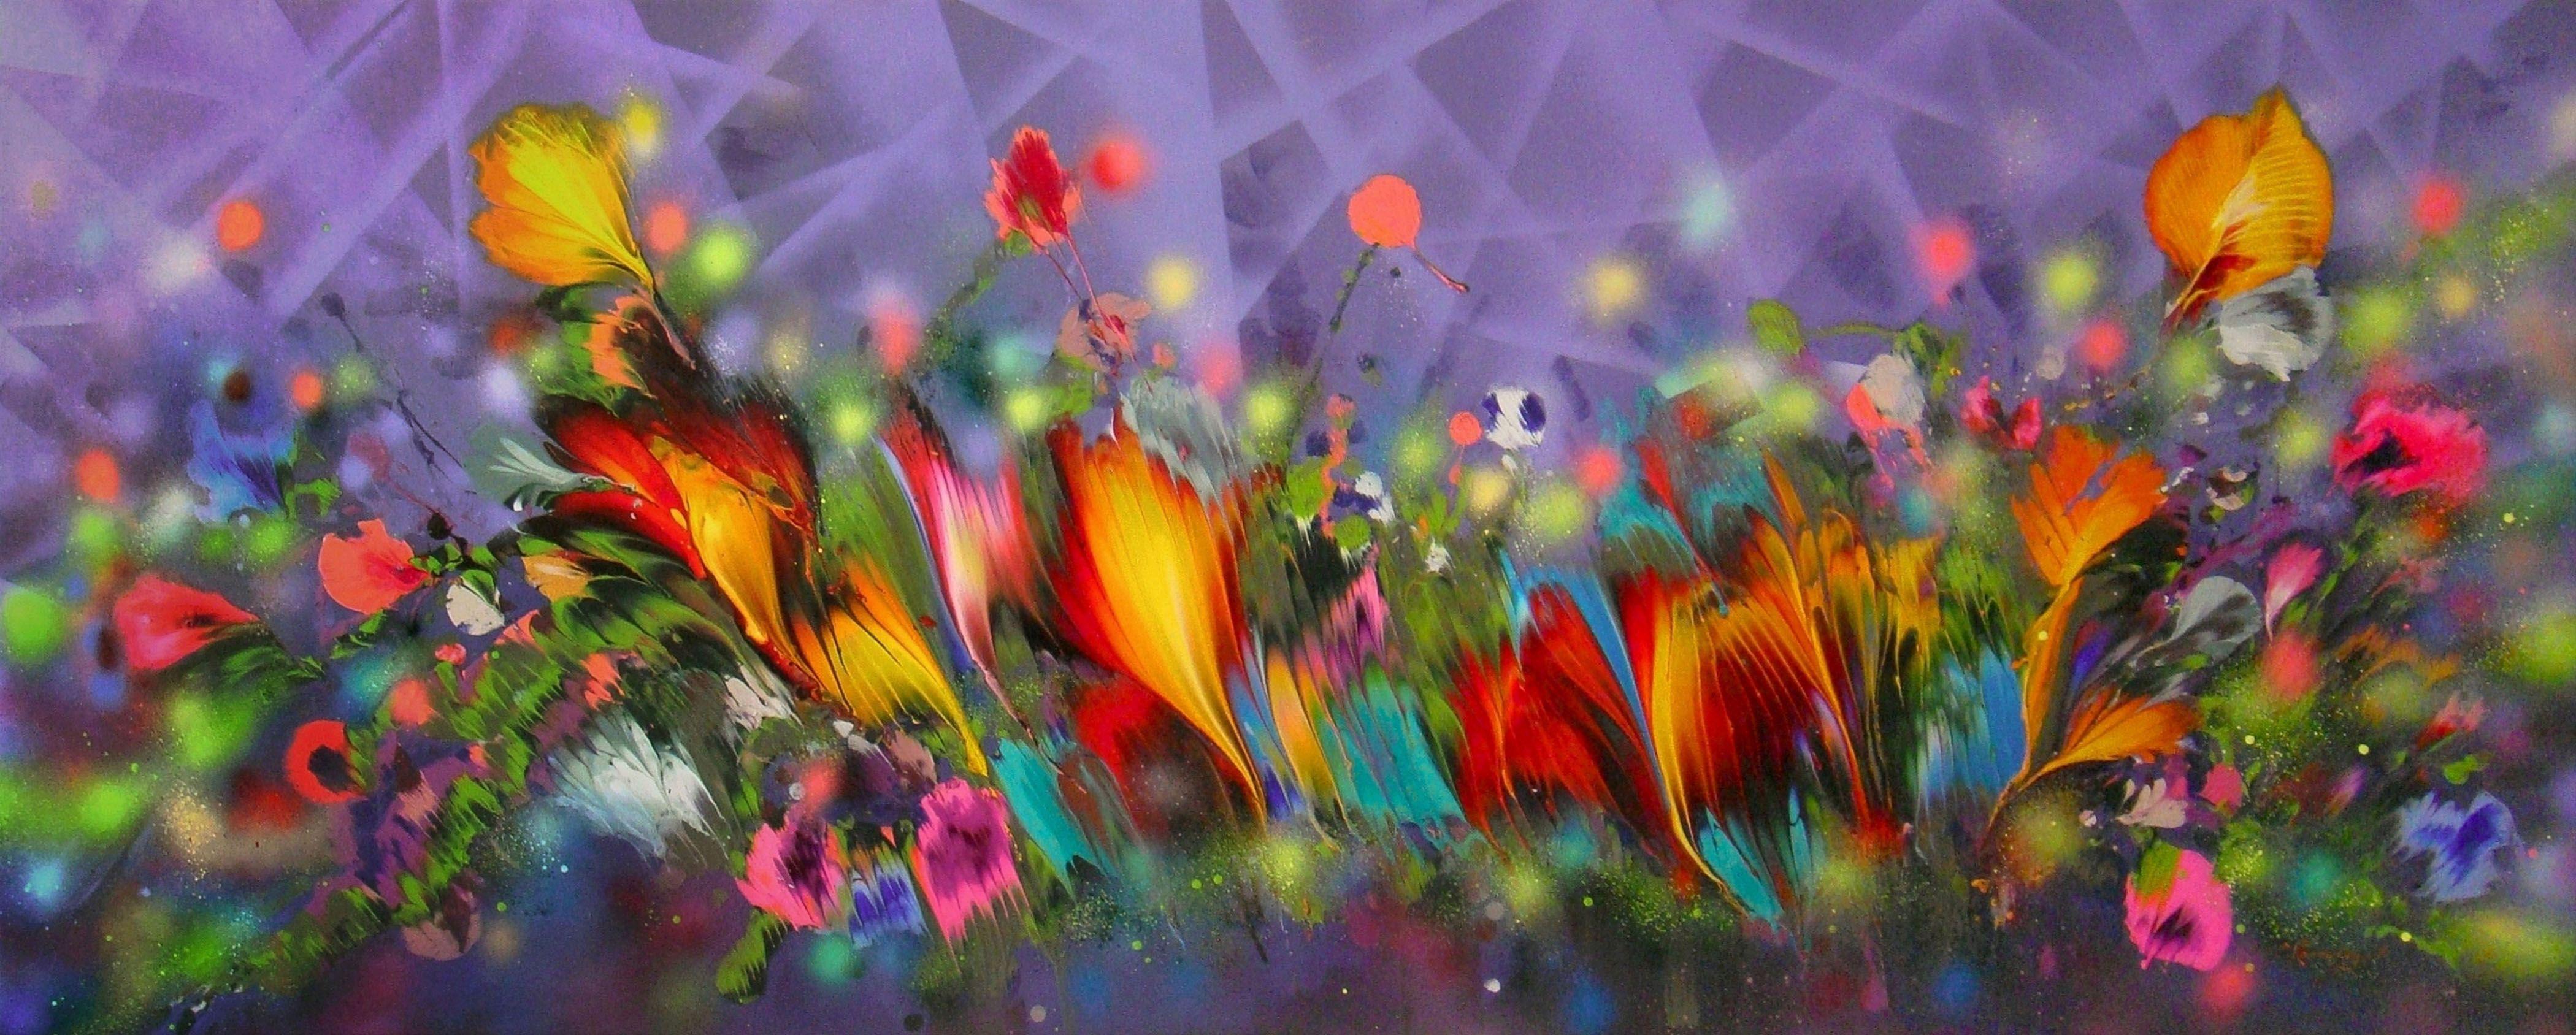 MAGIC GLOWING FLOWERS, Painting, Acrylic on Canvas